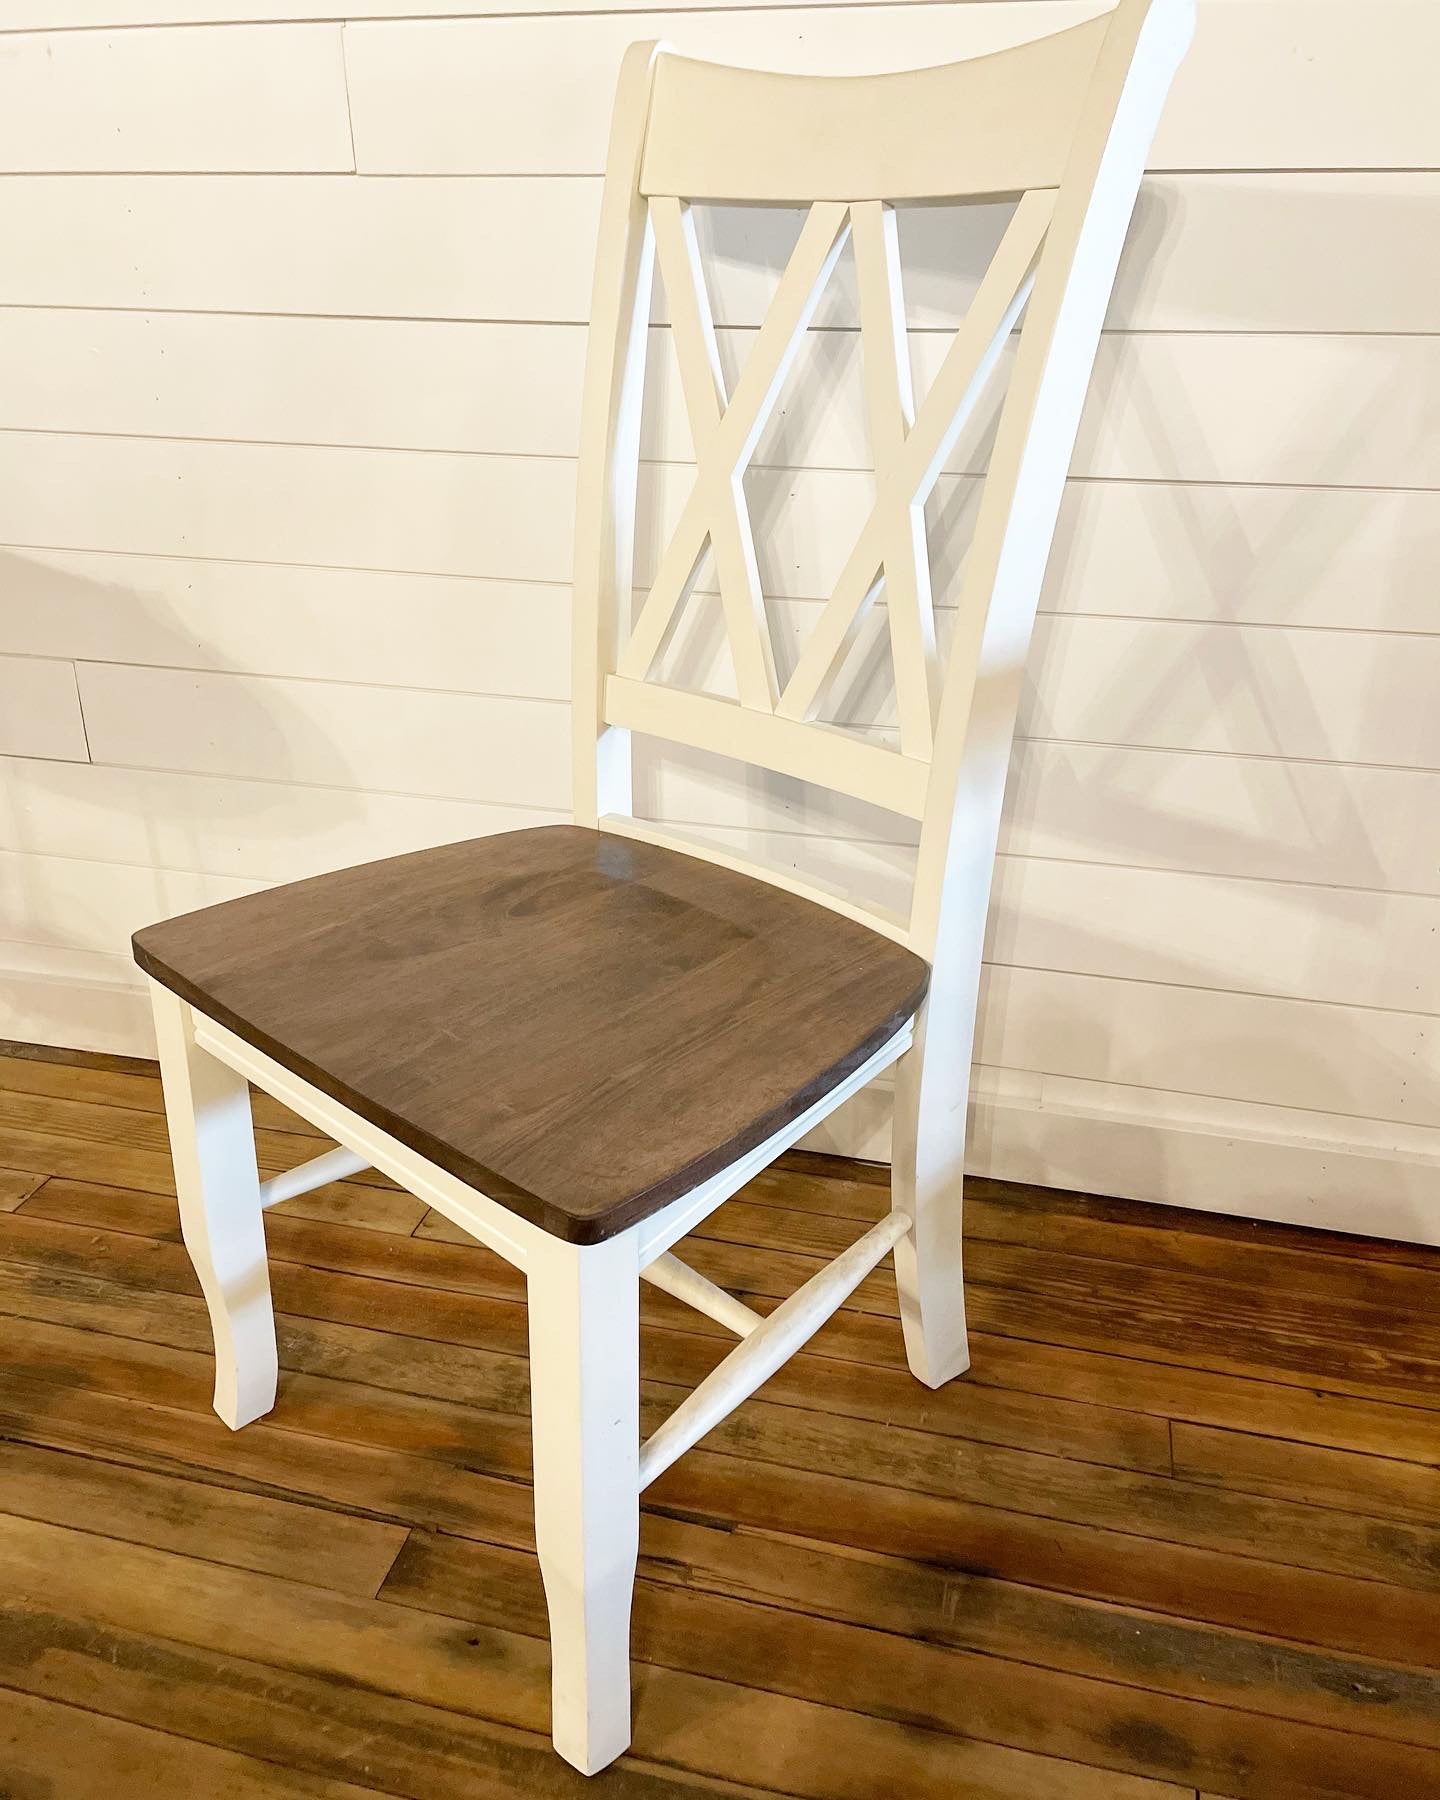 Pictured with White paint and Espresso seat.